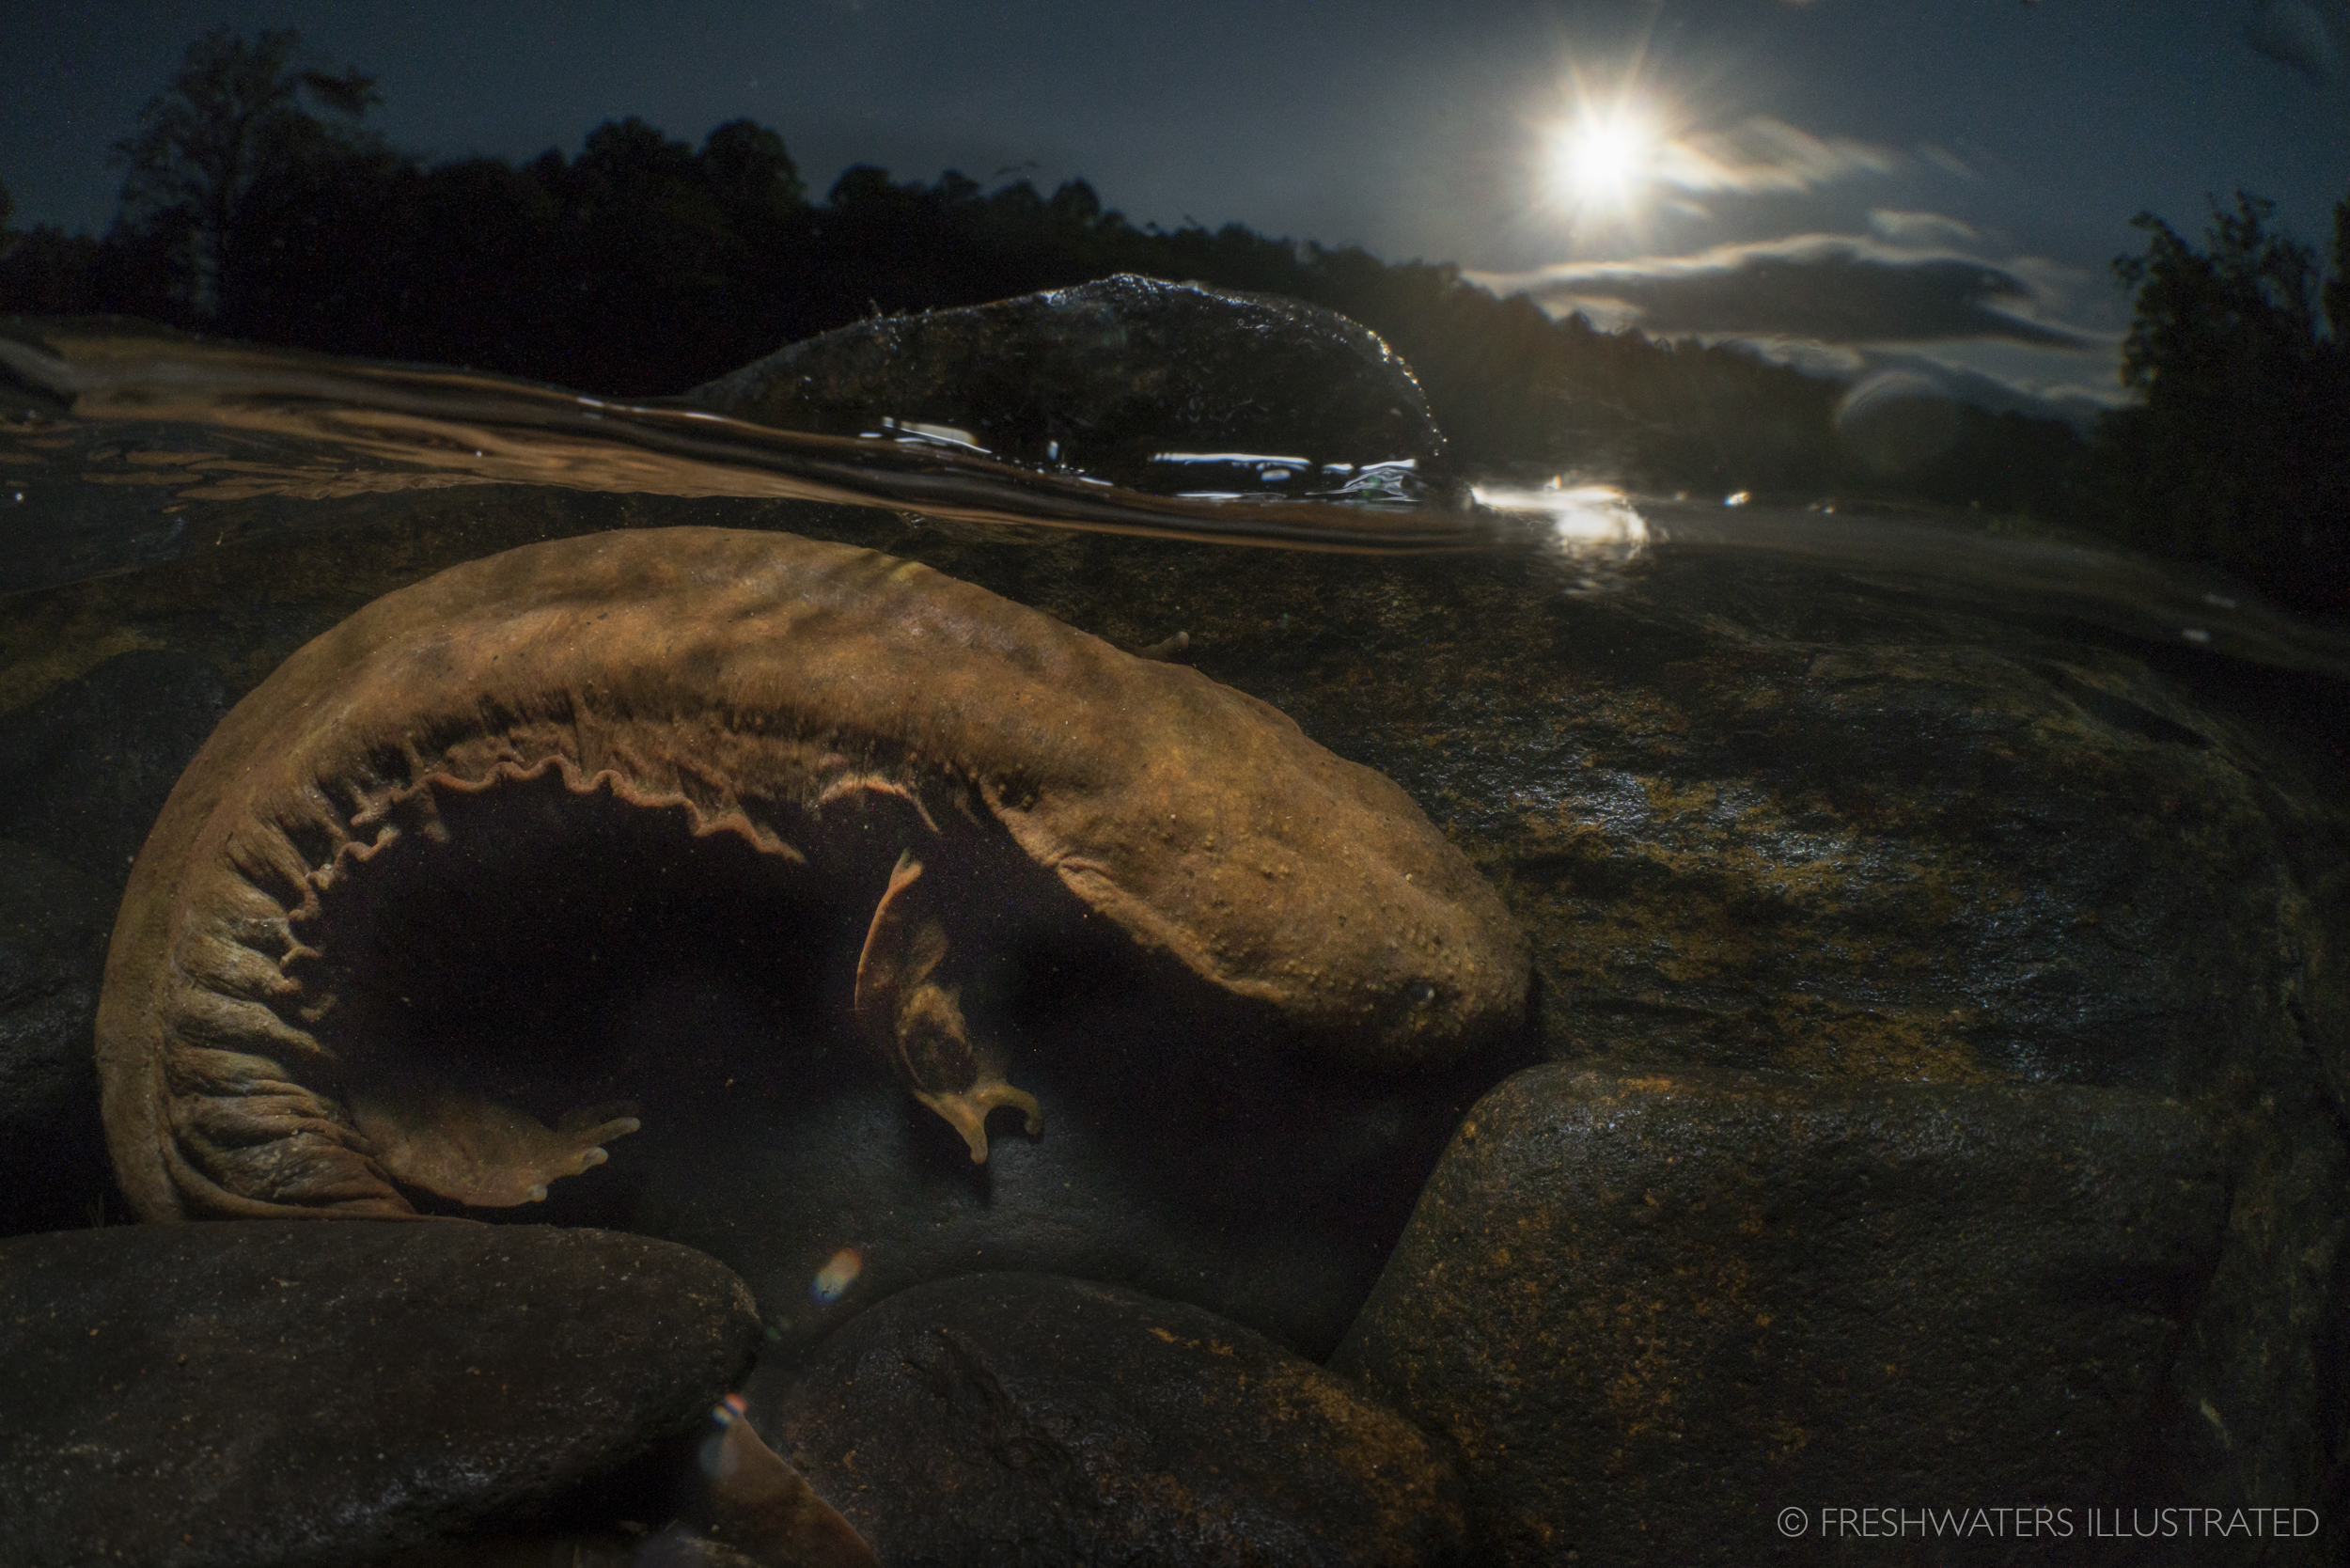  Under the light of a full moon, an Eastern Hellbender lurks among the cobble and bedrock of a Southern Appalachian river. Tennessee  www.freshwatersillustrated.org  